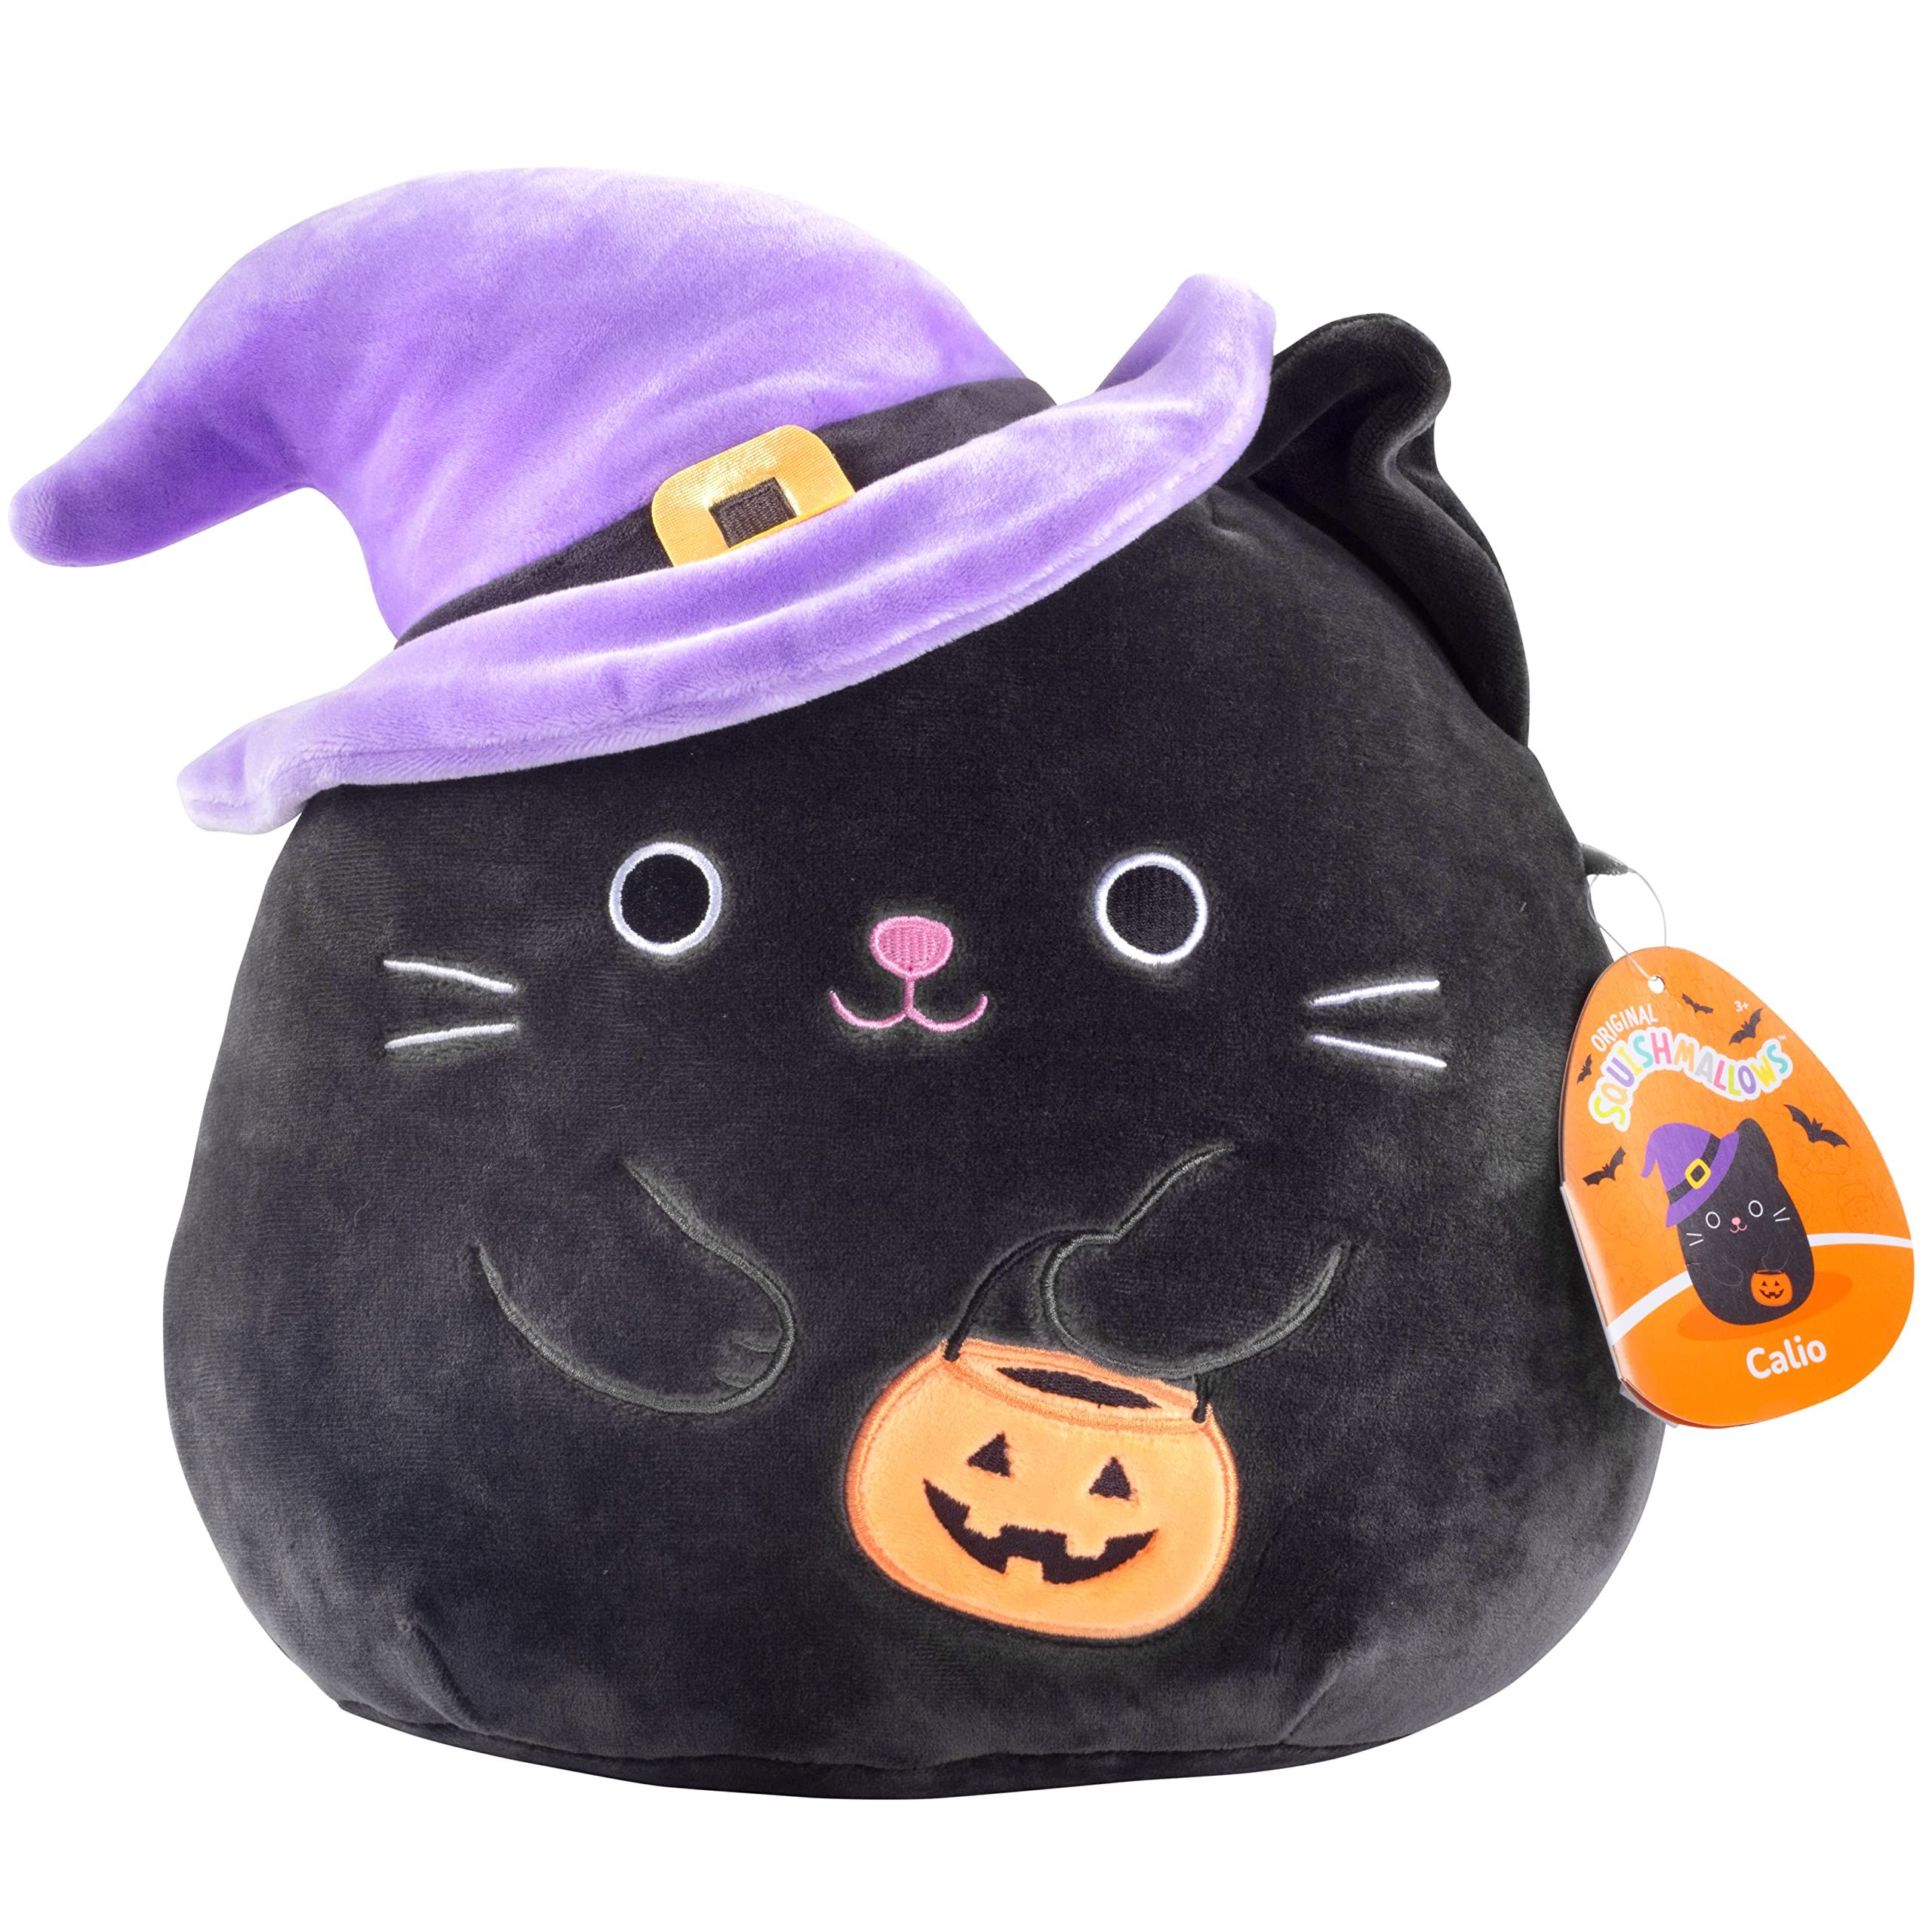 Squishmallows 10" Calio Black Cat with Witch Hat - Official Kellytoy Halloween Plush - Cute and Soft | Amazon (US)